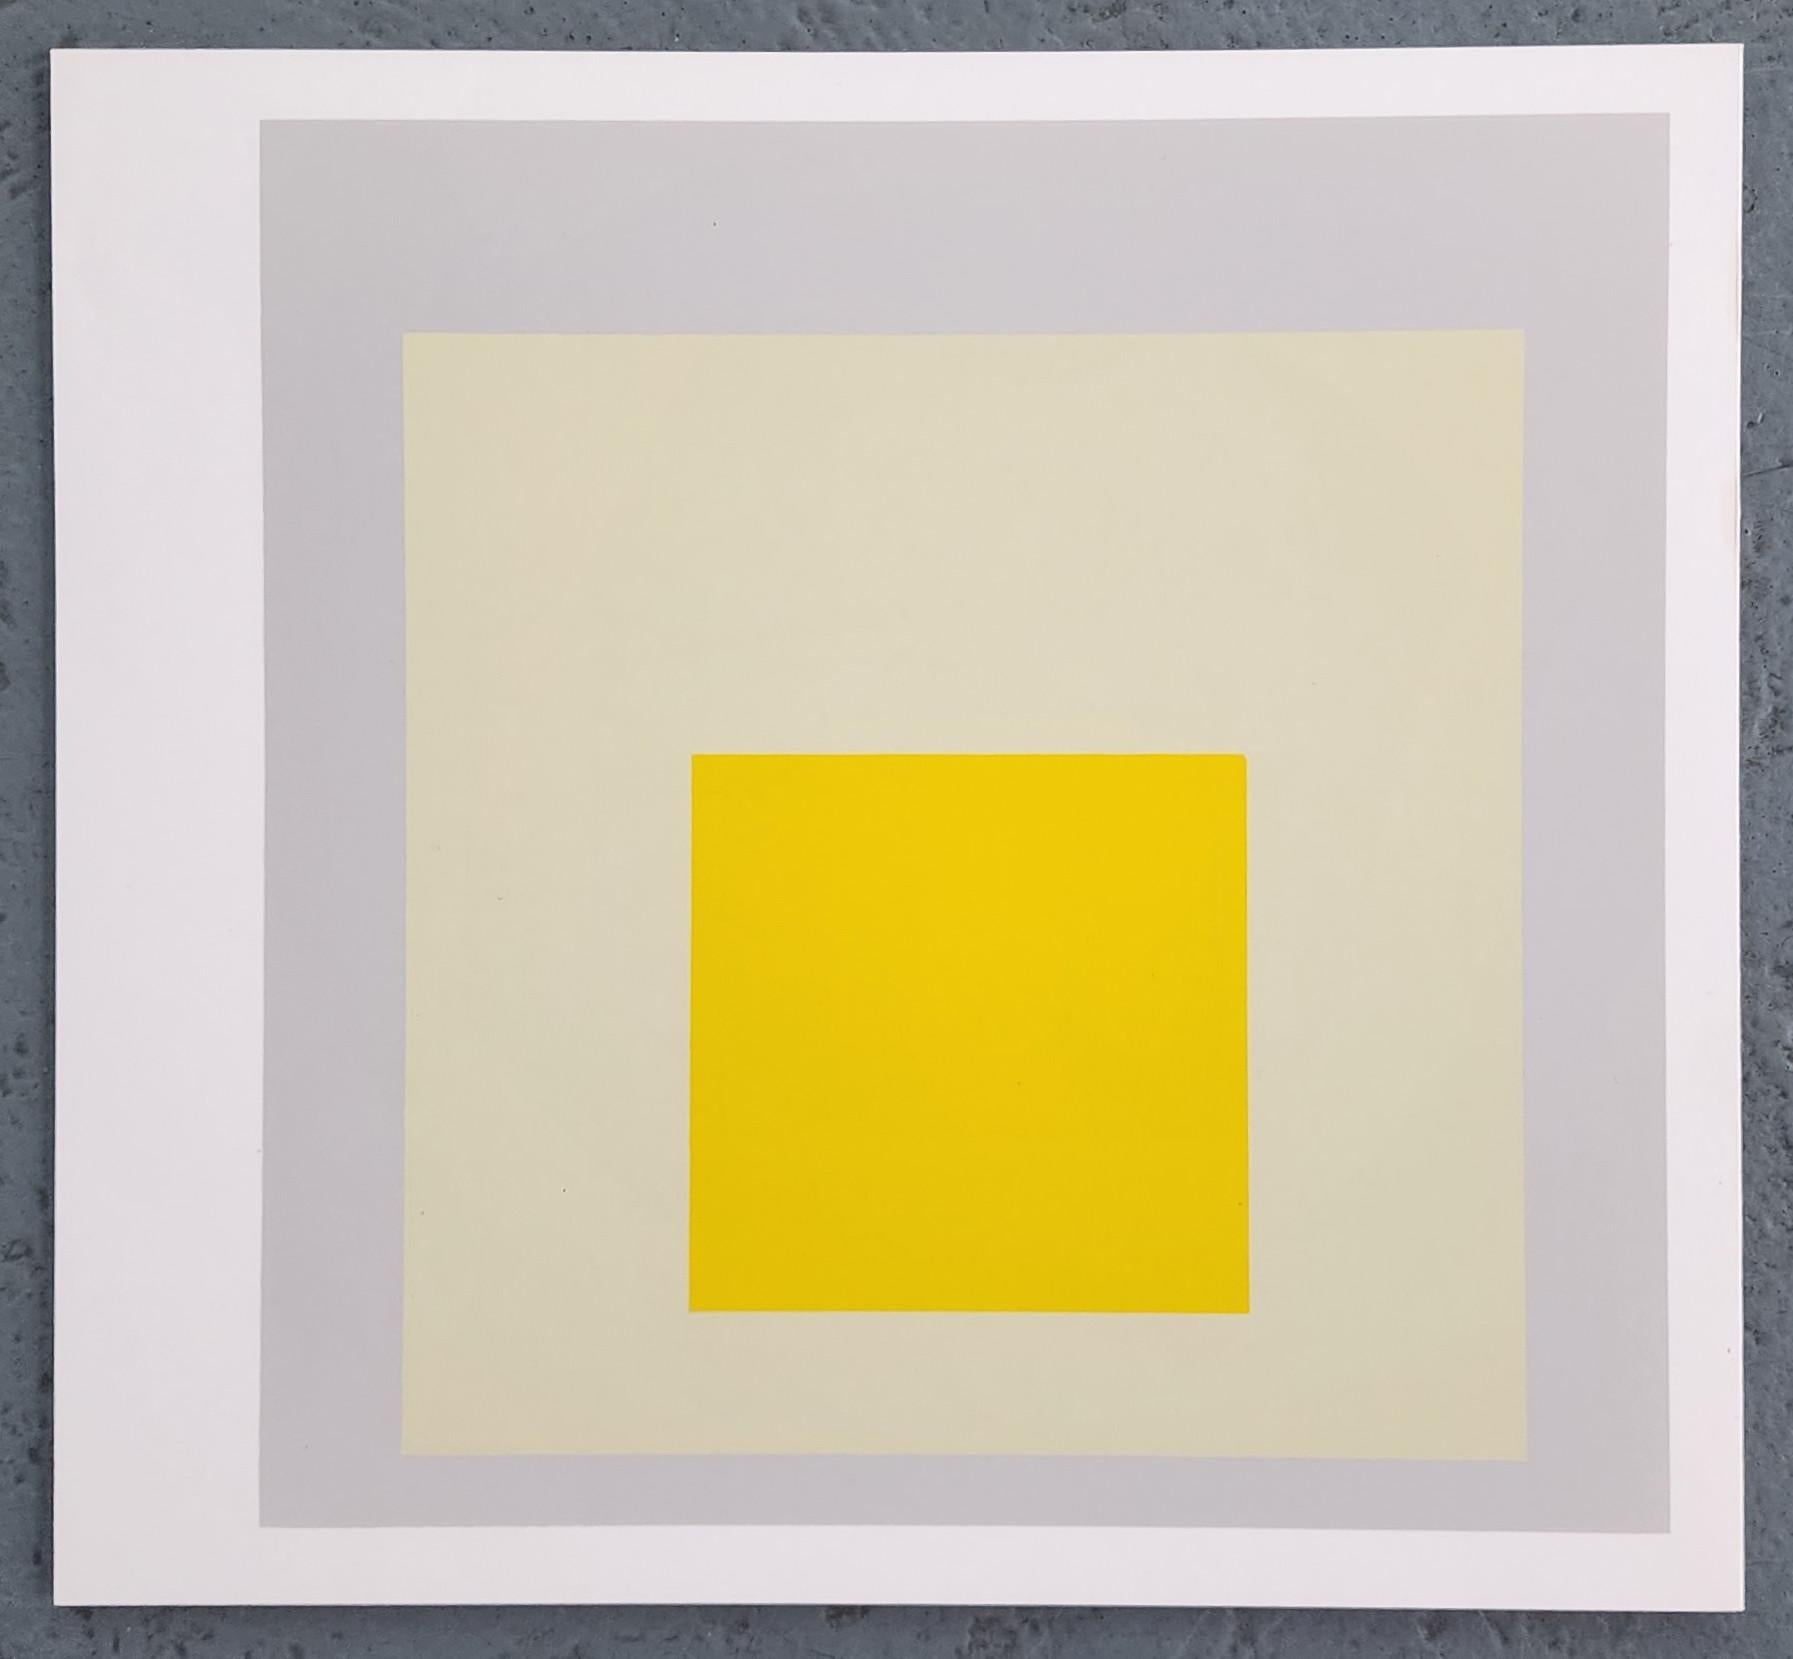 Josef Albers
Homage to the Square: Impact (from 